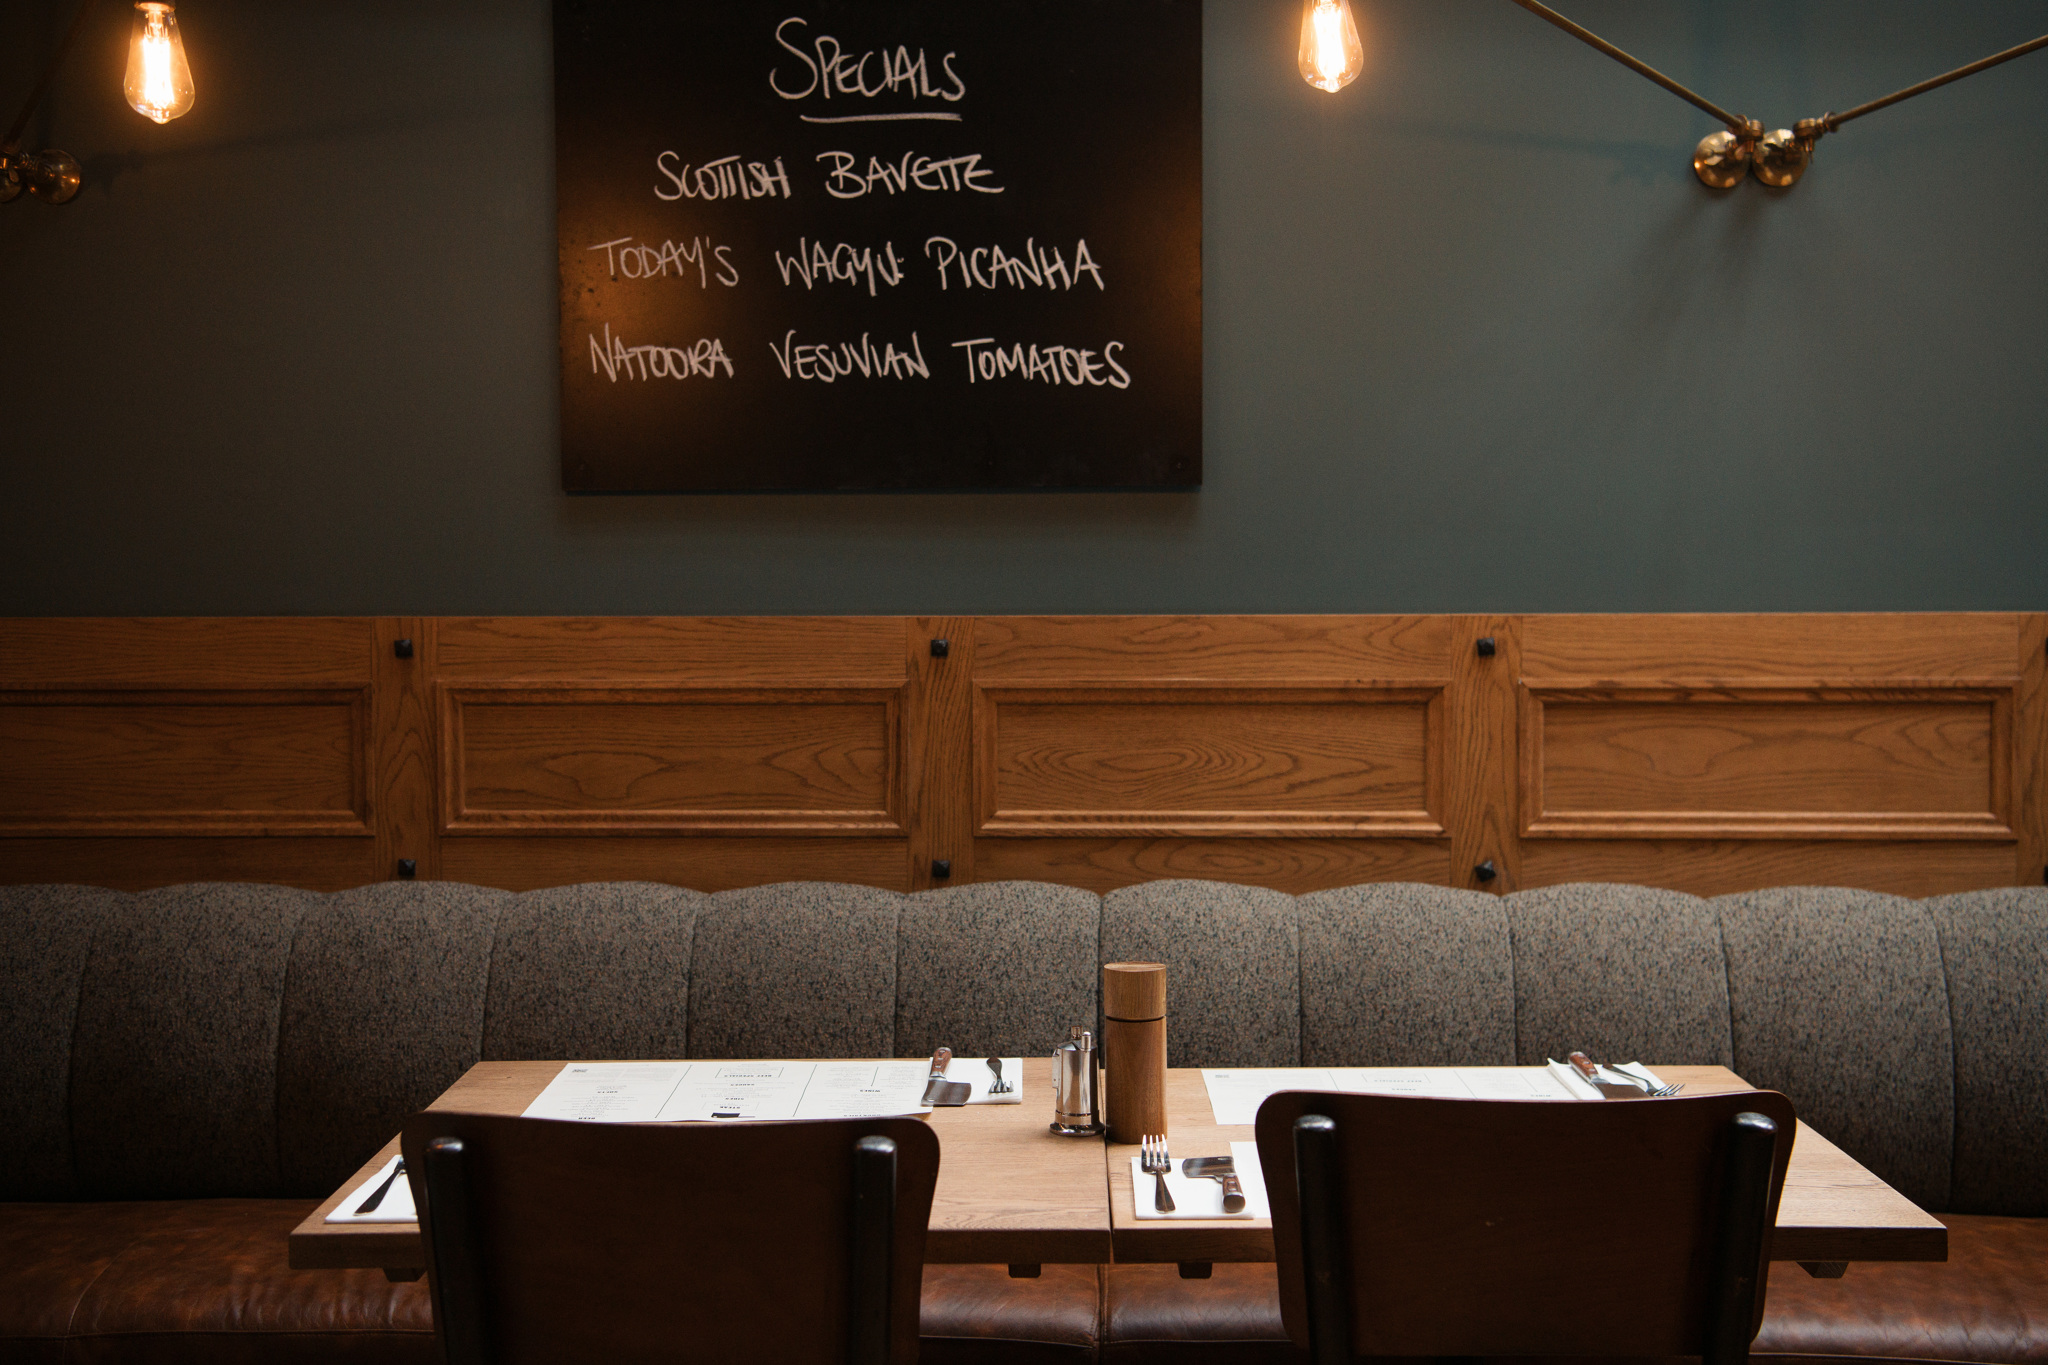 Grey Banquettes with table, blackboard with menu on the wall.